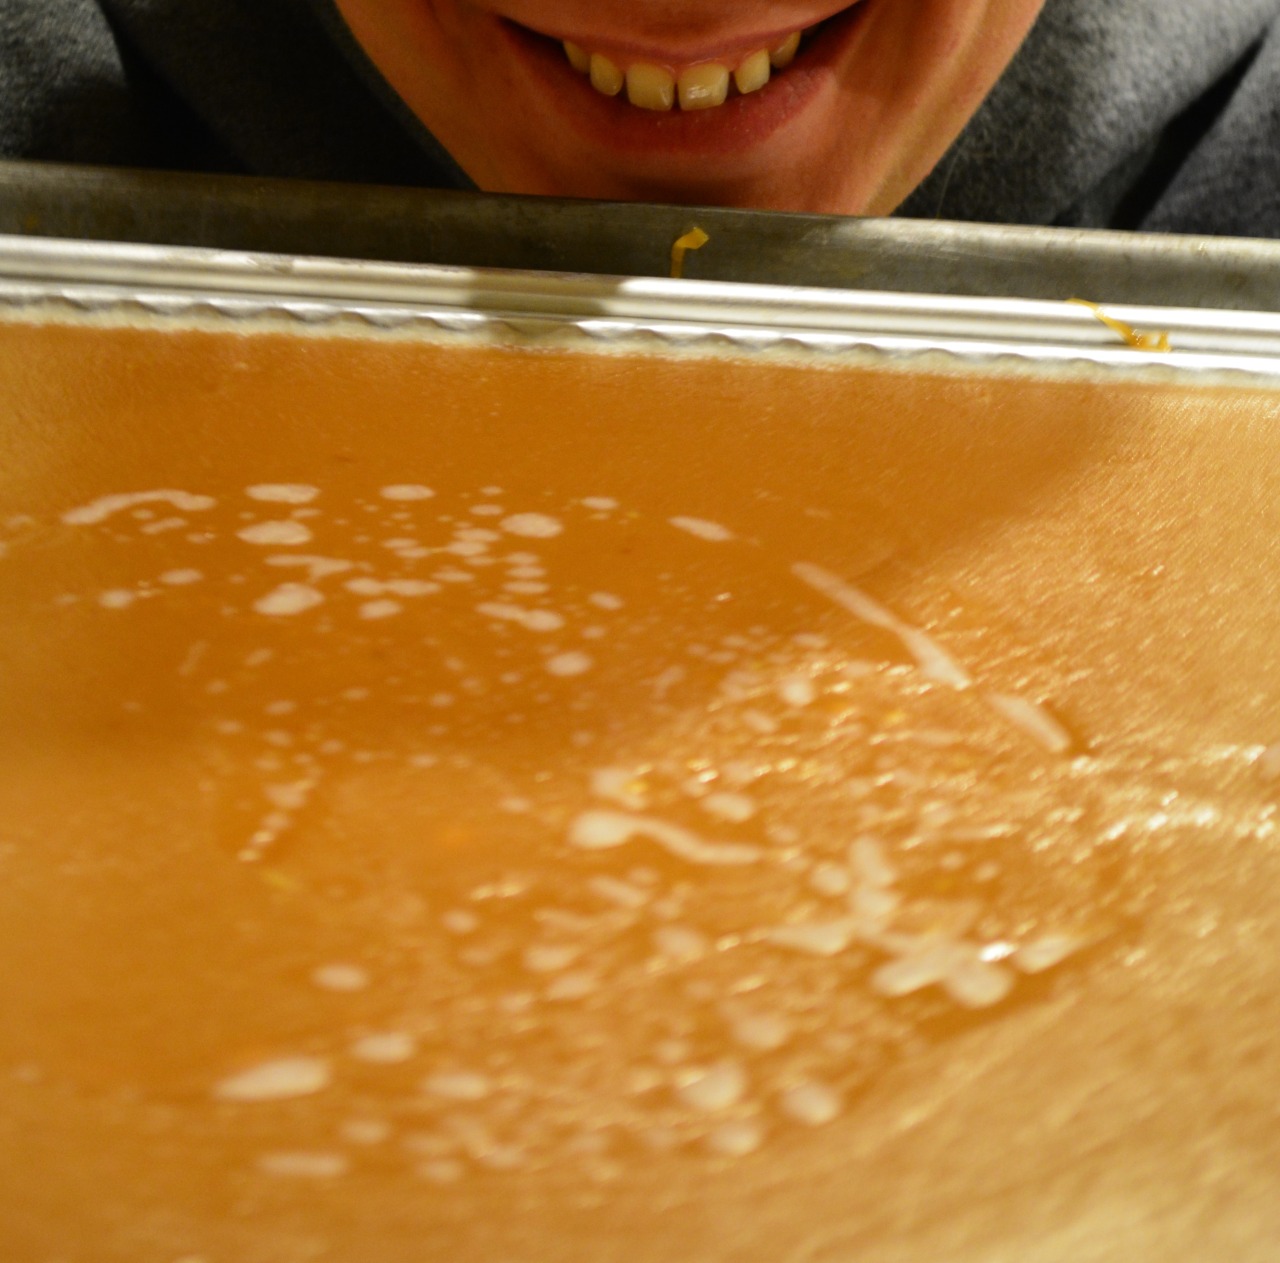 Look at that gooey, freshly made caramel. Here is the post for the holiday caramel